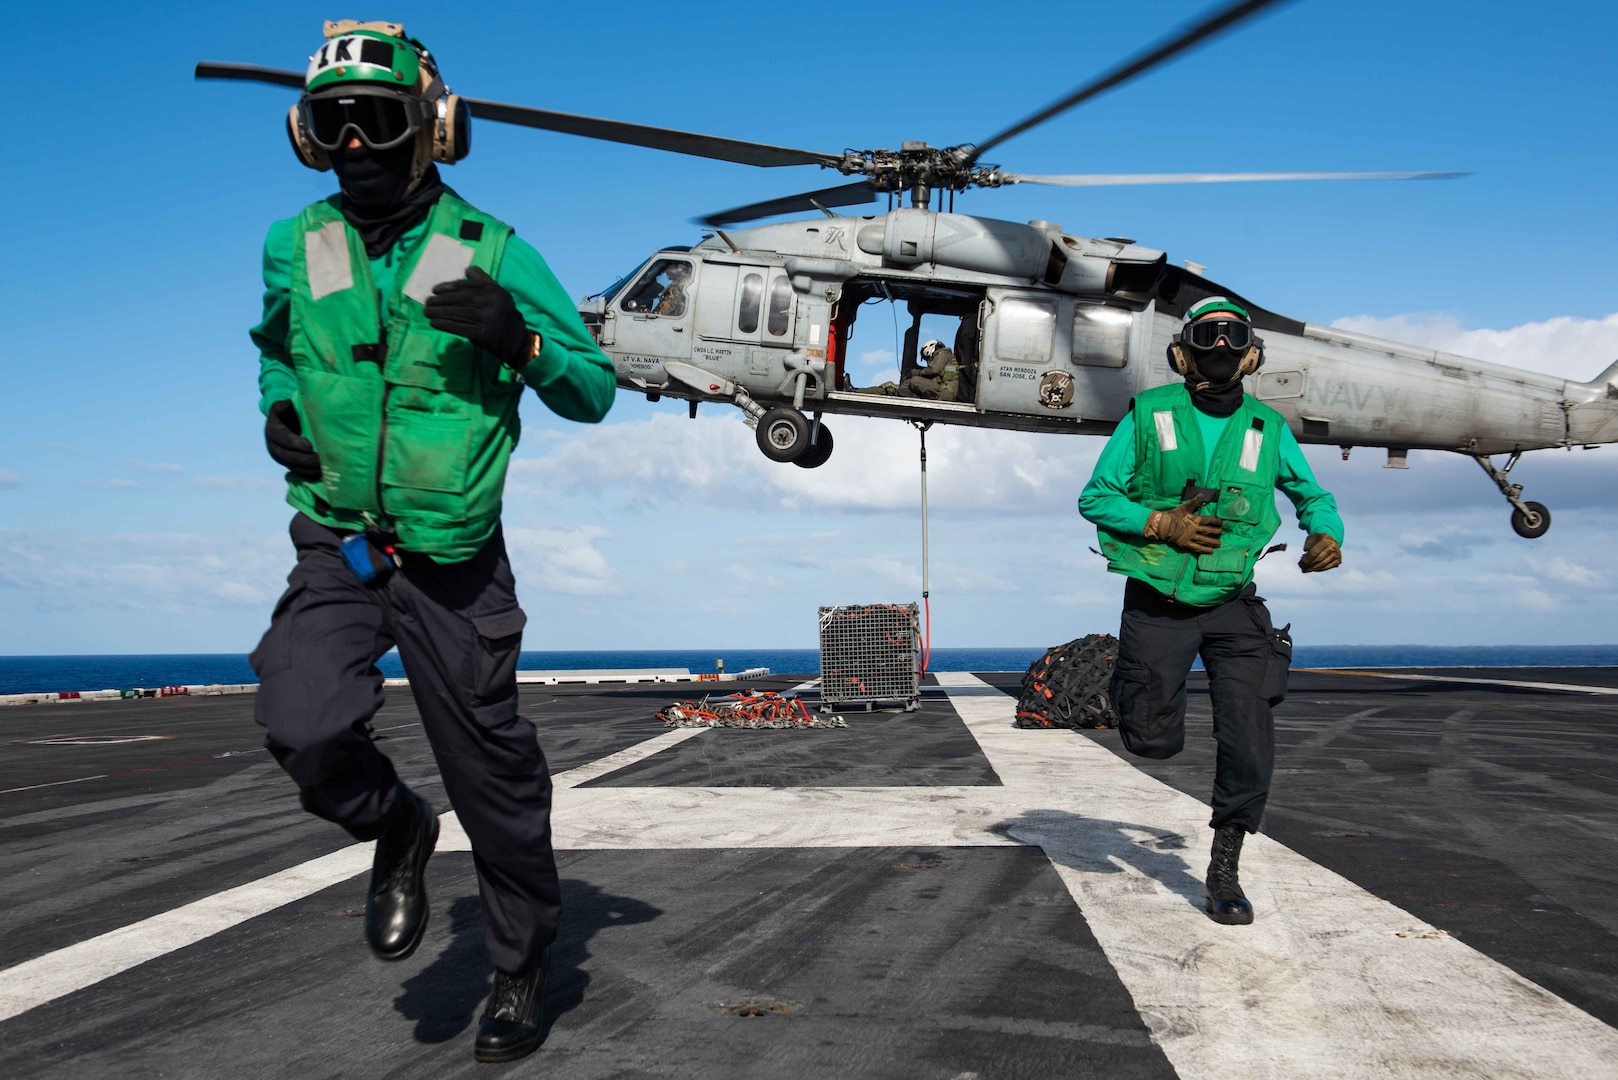 Sailors move away from MH-60S Sea Hawk helicopter assigned to “Eightballers” of Helicopter Sea Combat Squadron 8 as it lifts cargo from flight deck of USS Theodore Roosevelt during replenishment-at-sea with USNS Henry J. Kaiser, Pacific Ocean, July 1, 2020 (U.S. Navy/Erik Melgar)